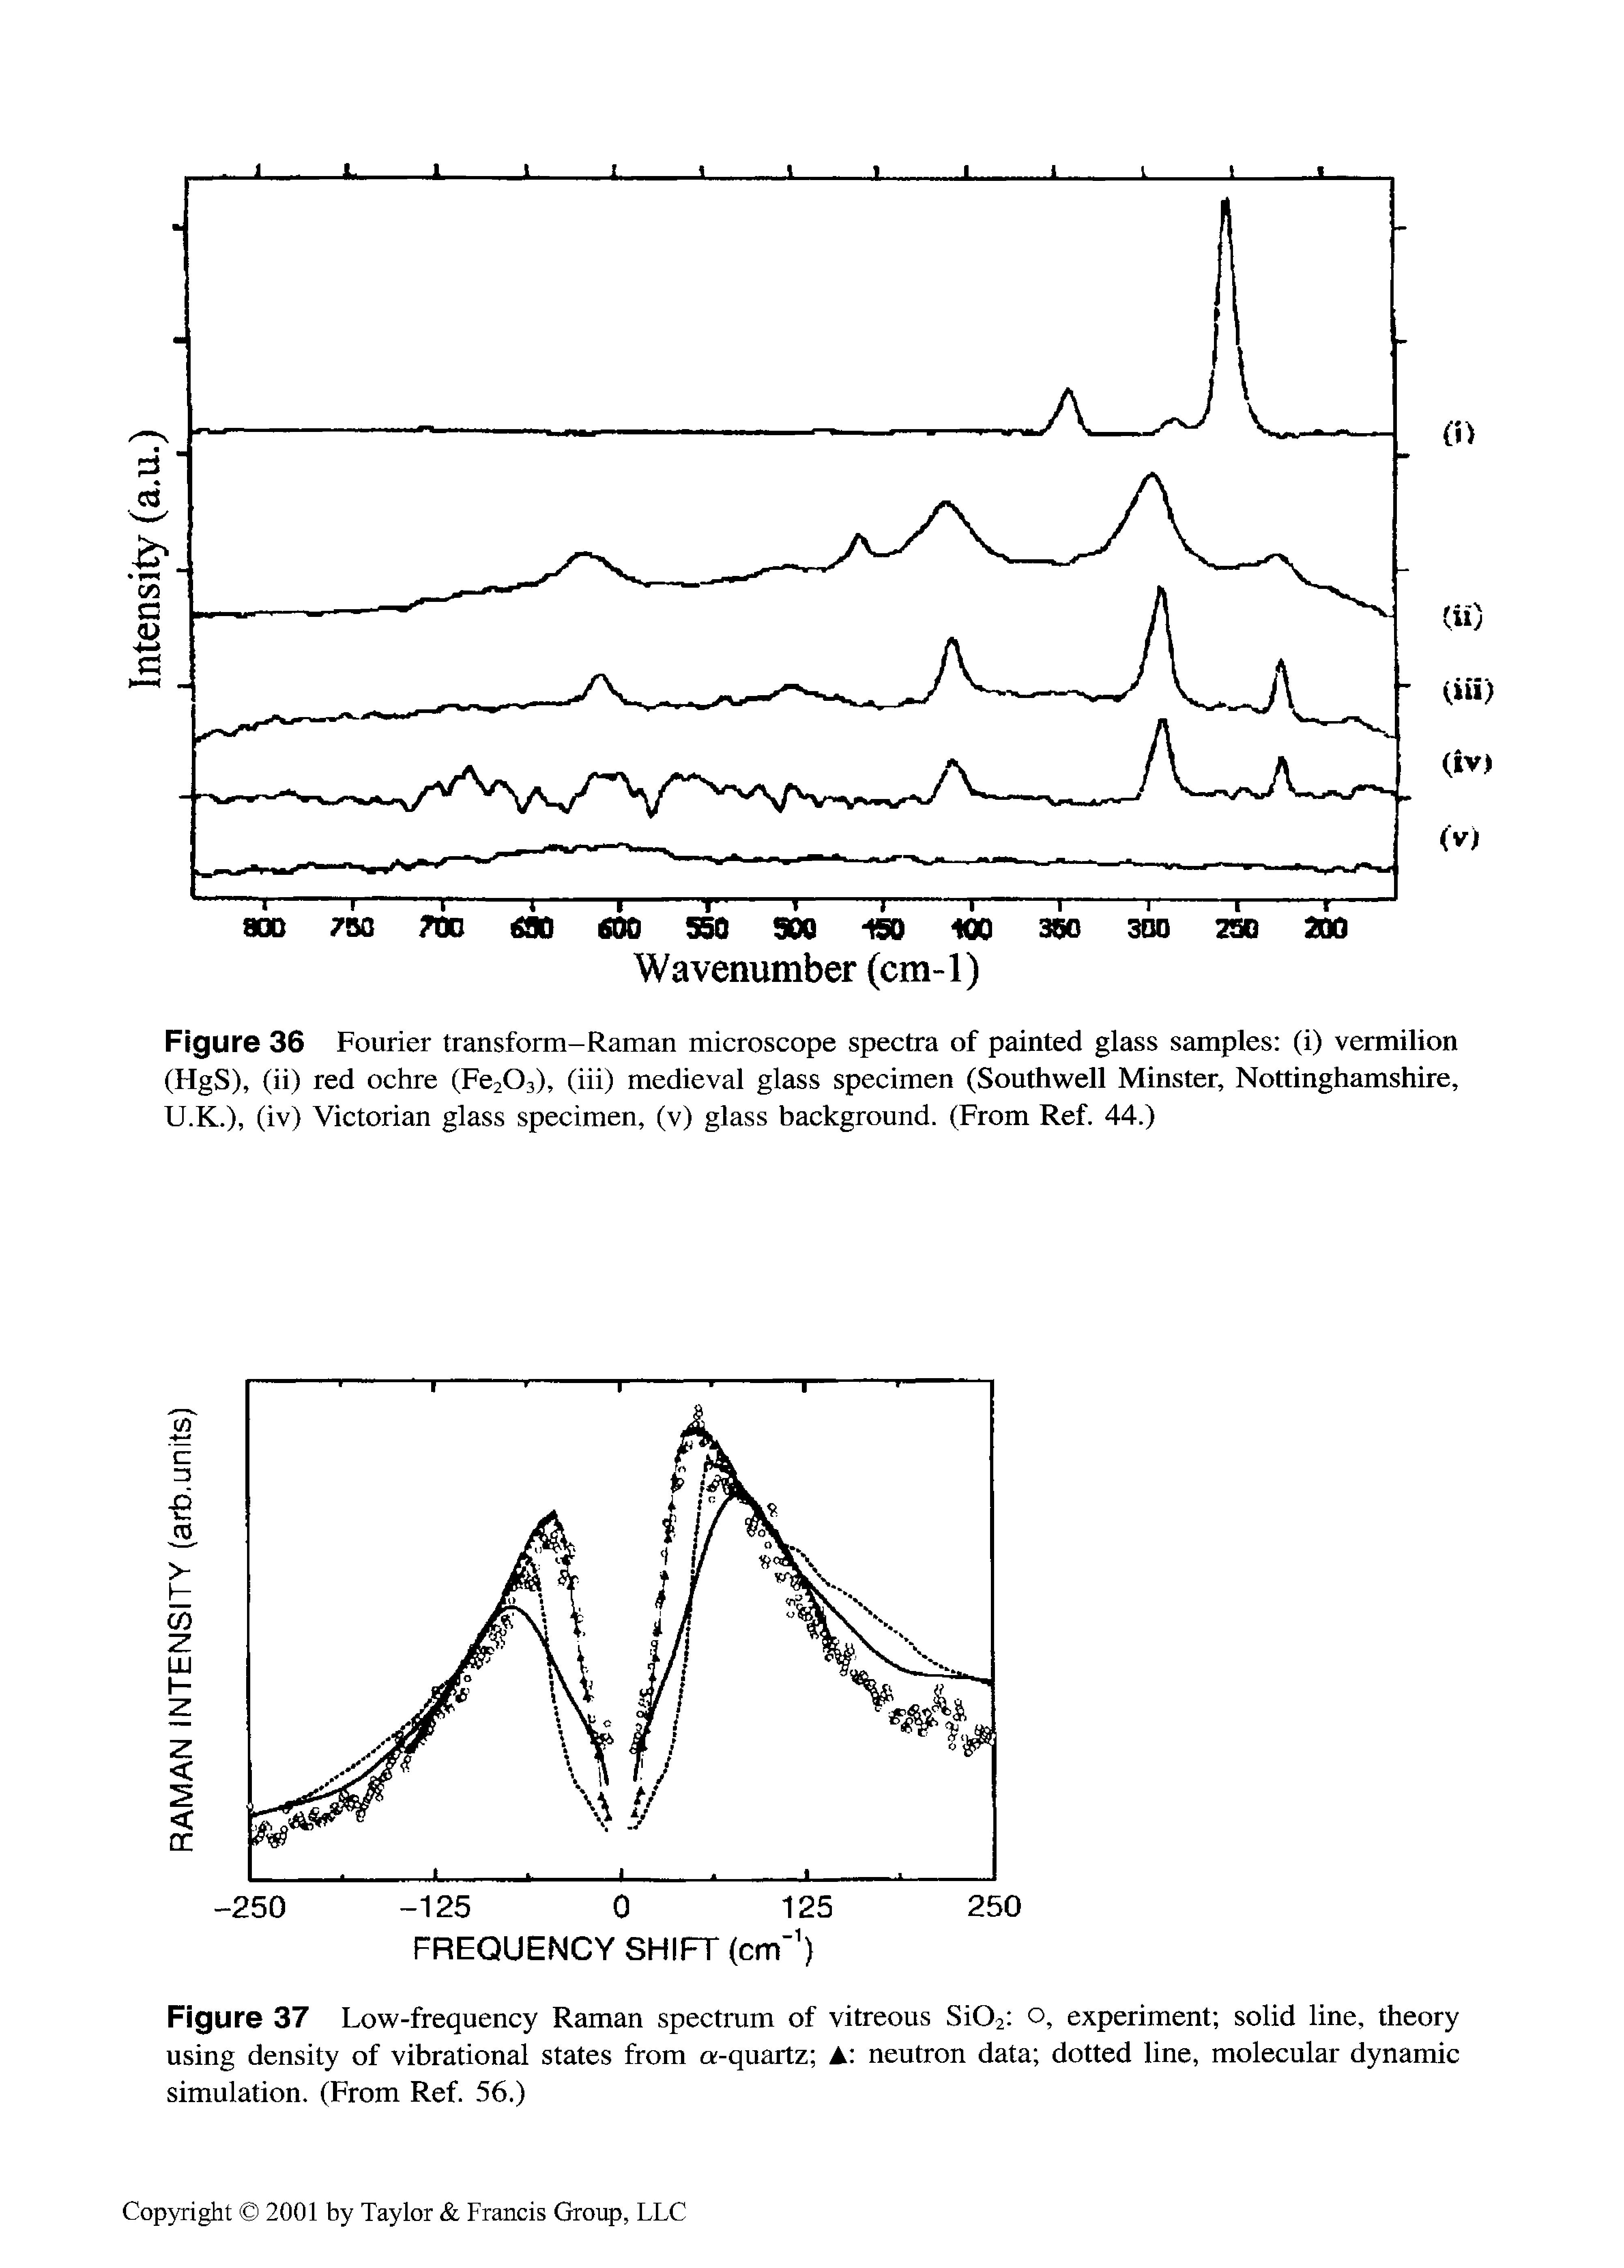 Figure 37 Low-frequency Raman spectrum of vitreous Si02 o, experiment solid line, theory using density of vibrational states from a-quartz A neutron data dotted line, molecular dynamic simulation, (From Ref. 56.)...